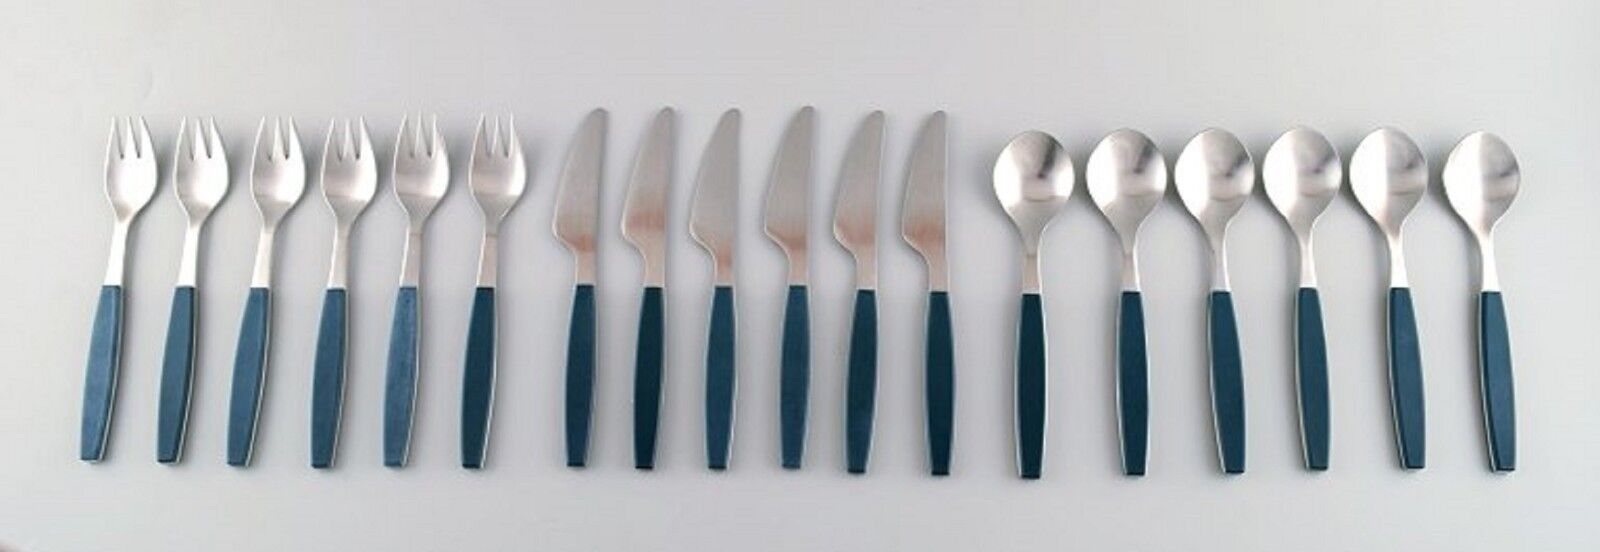 Complete service for 6 p, Henning Koppel. Stainless steel ,green plastic cutlery